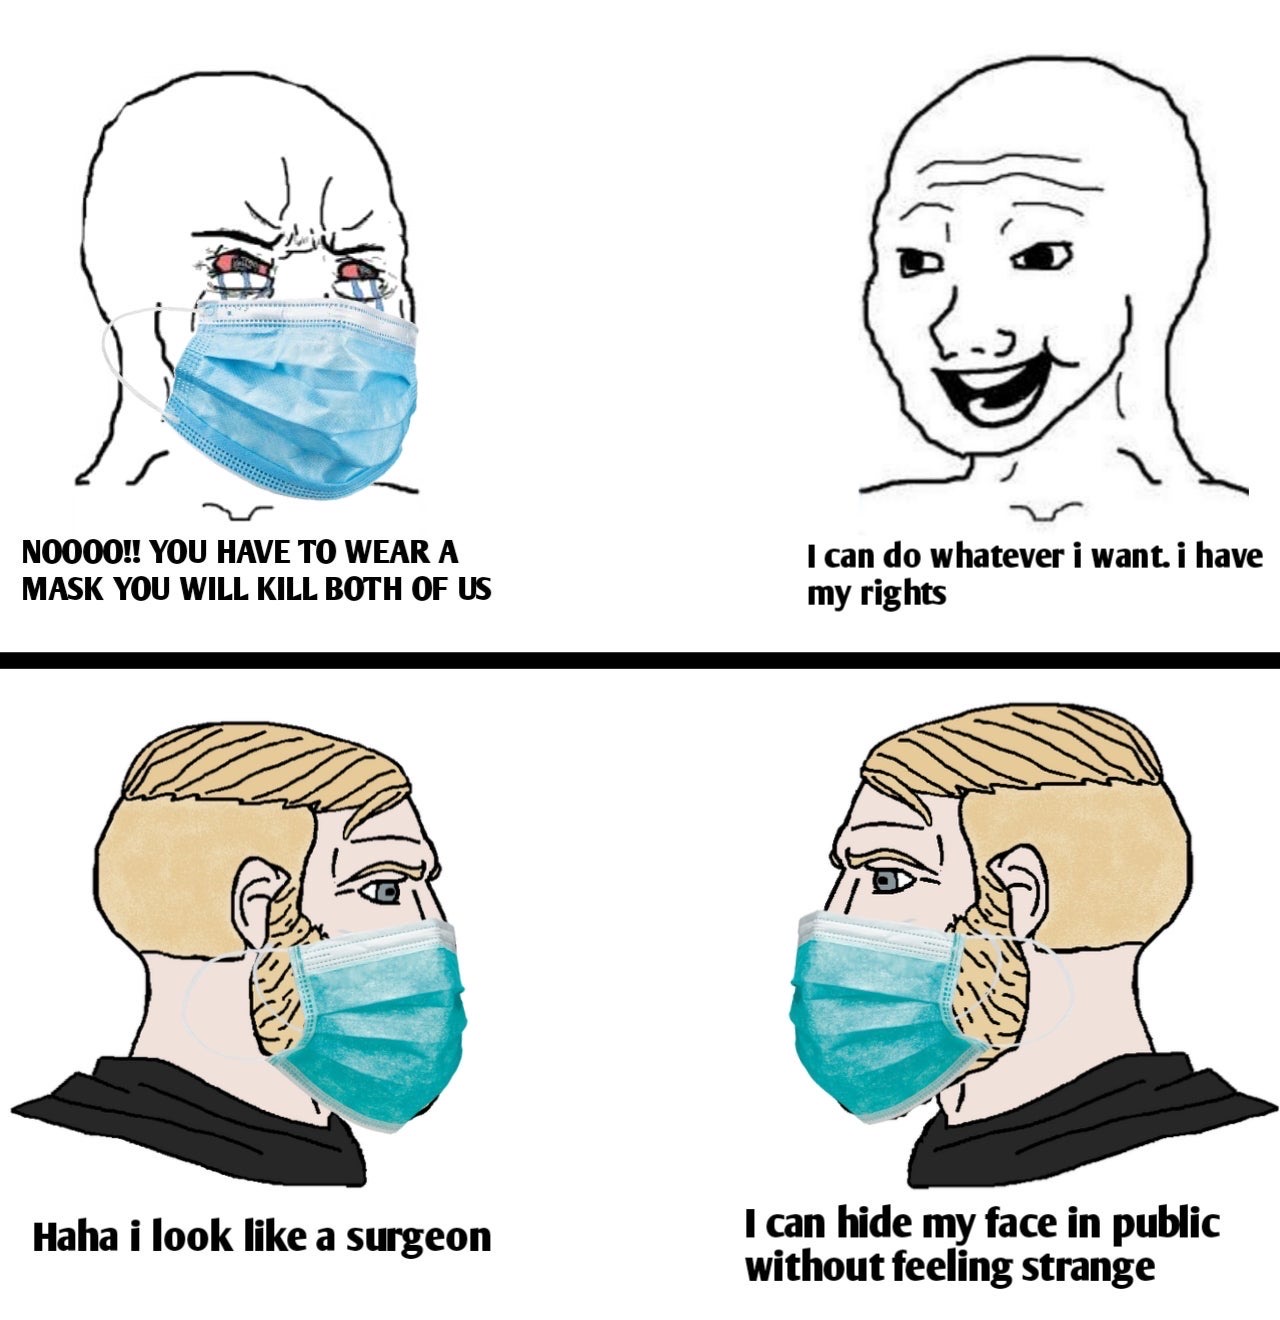 dank memes dank meme - cartoon - Noooo!! You Have To Wear A Mask You Will Kill Both Of Us I can do whatever i want. i have my rights Haha i look a surgeon I can hide my face in public without feeling strange